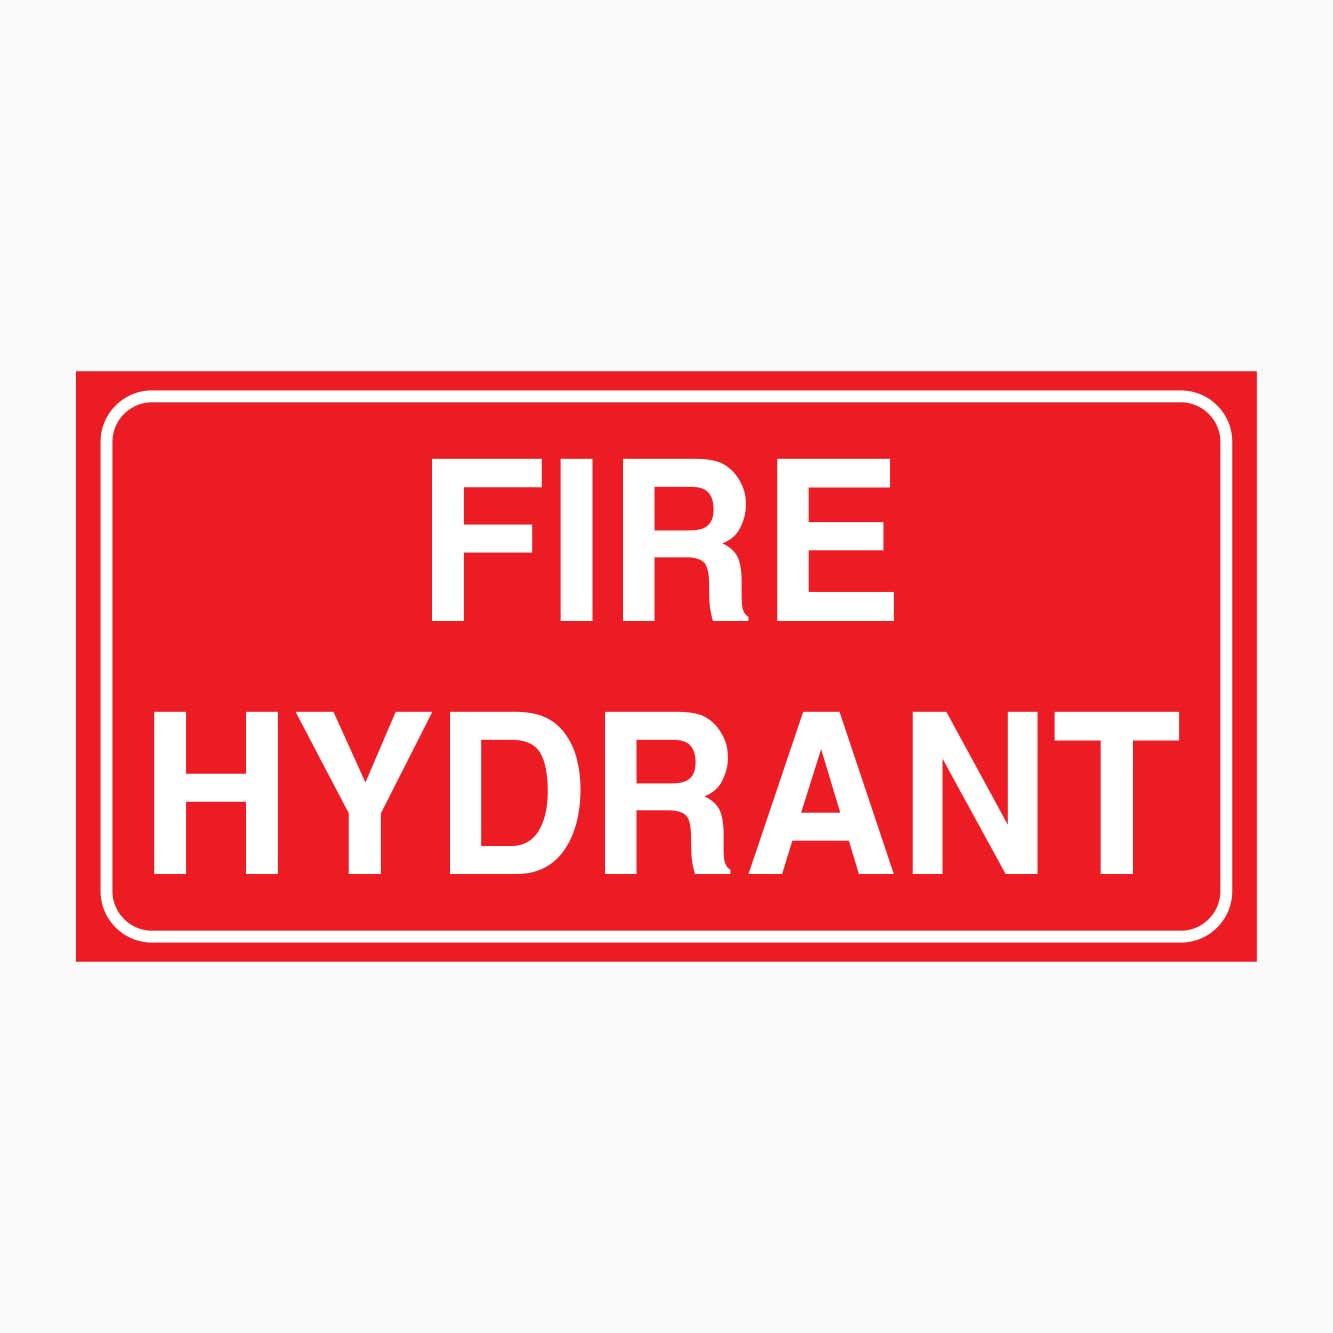 FIRE HYDRANT SIGN - GET SIGNS